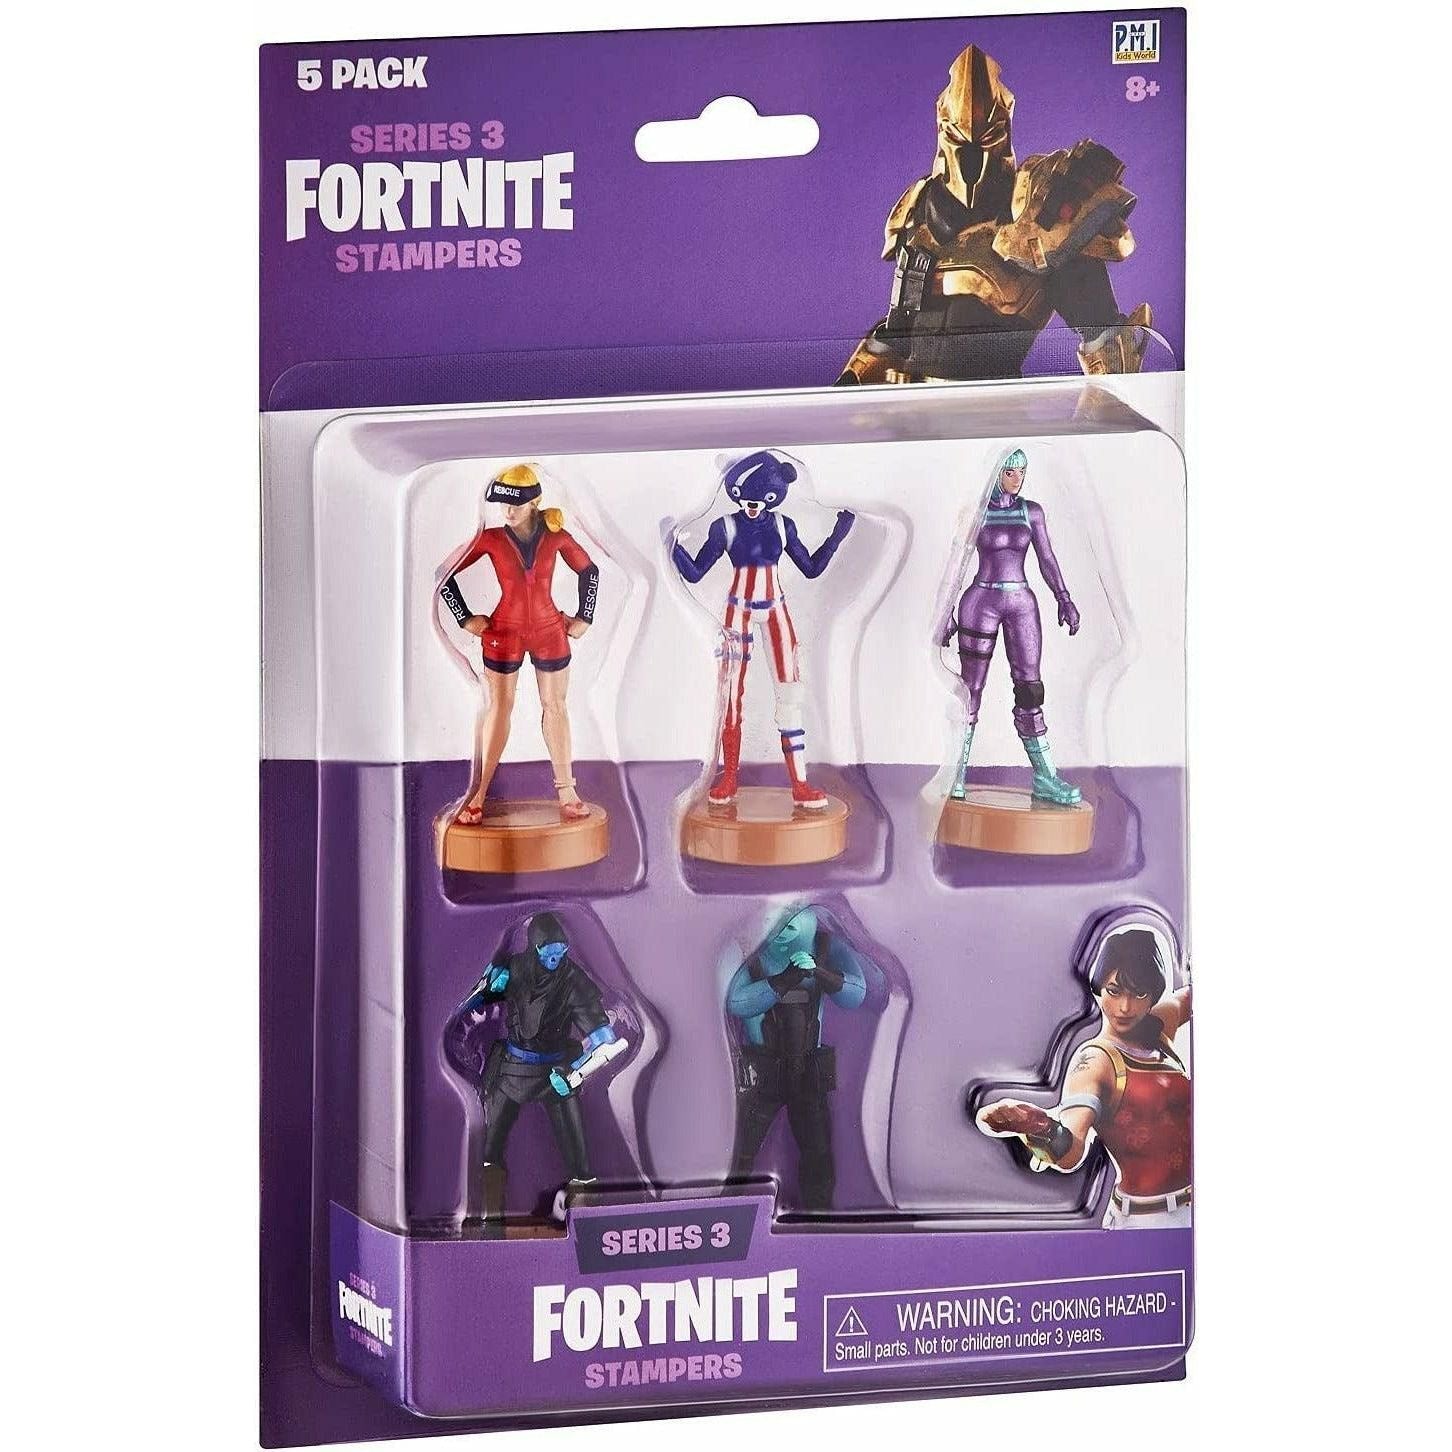 Fortnite Stampers P.M.I. - Authentic Action Figures with Stamp – Series 3 Collection - BumbleToys - 8+ Years, 8-13 Years, Action Battling, Action Figures, Boys, Figures, Fortnite, OXE